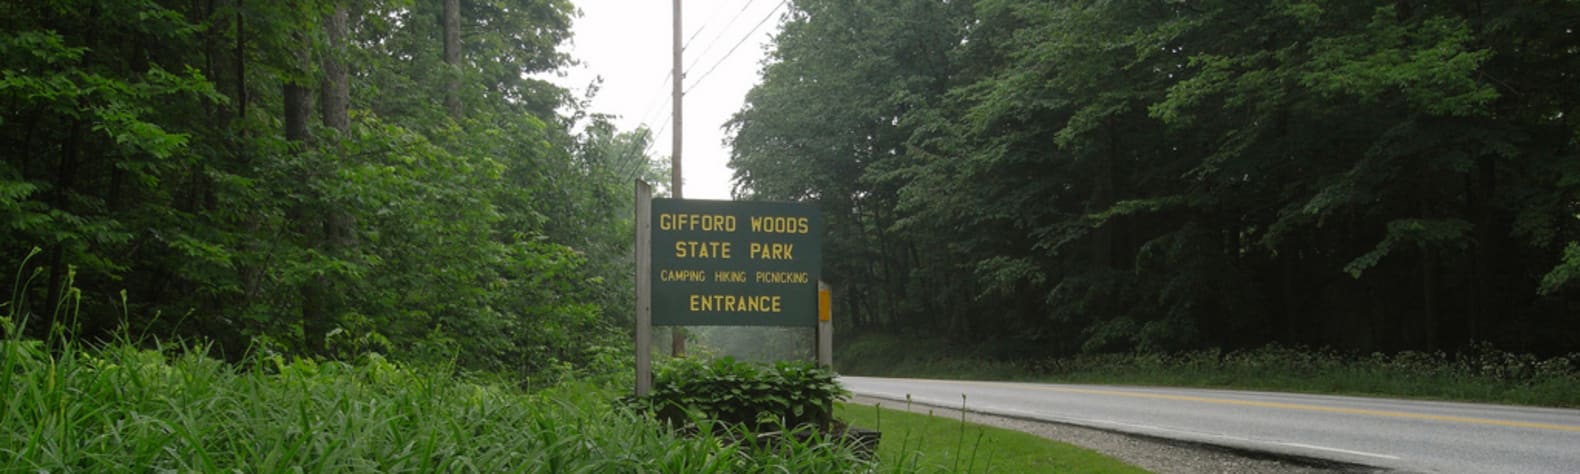 Gifford Woods State Park